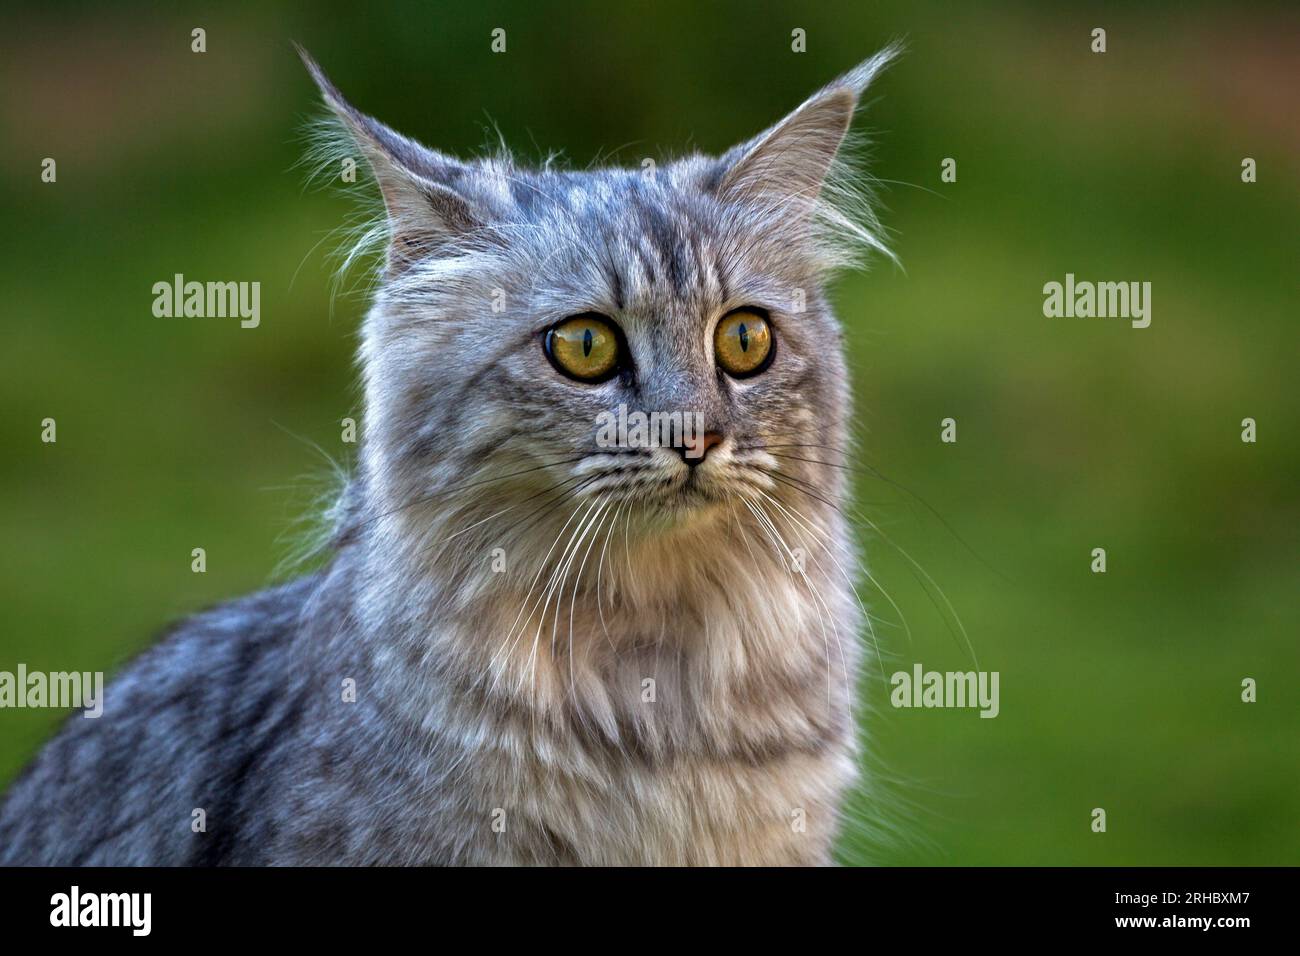 Close-up portrait of a tabby cat Stock Photo